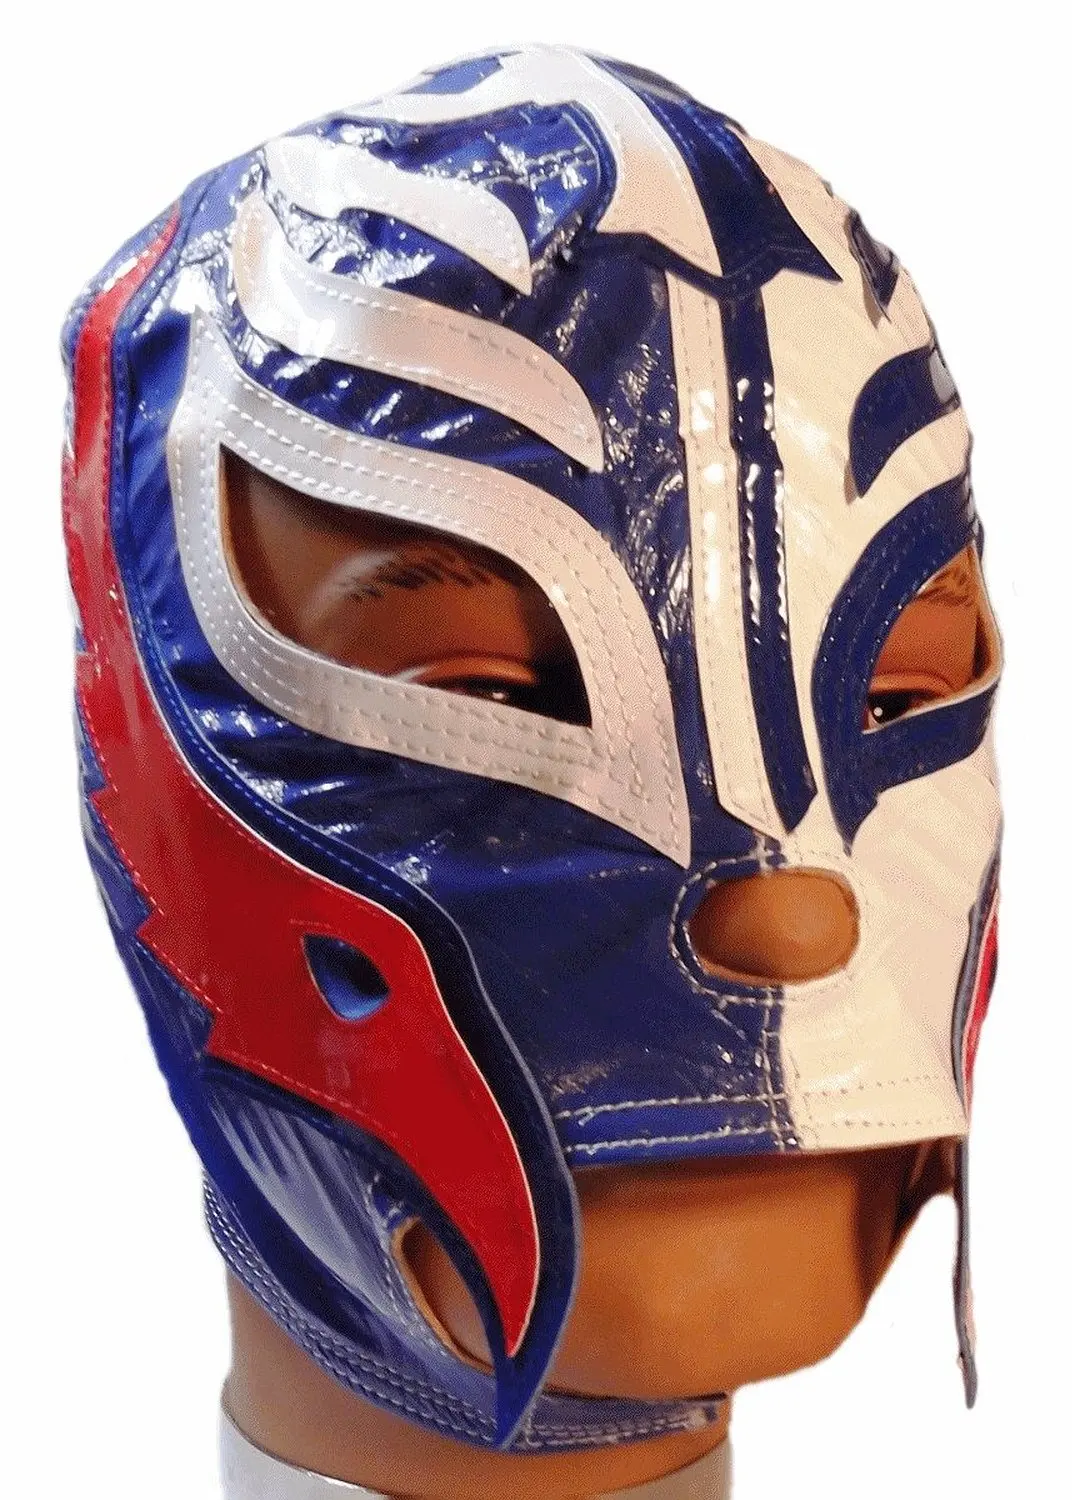 Buy Wwe Rey Mysterio Kid Size Blue White Replica Mask In Cheap Price On Alibaba Com